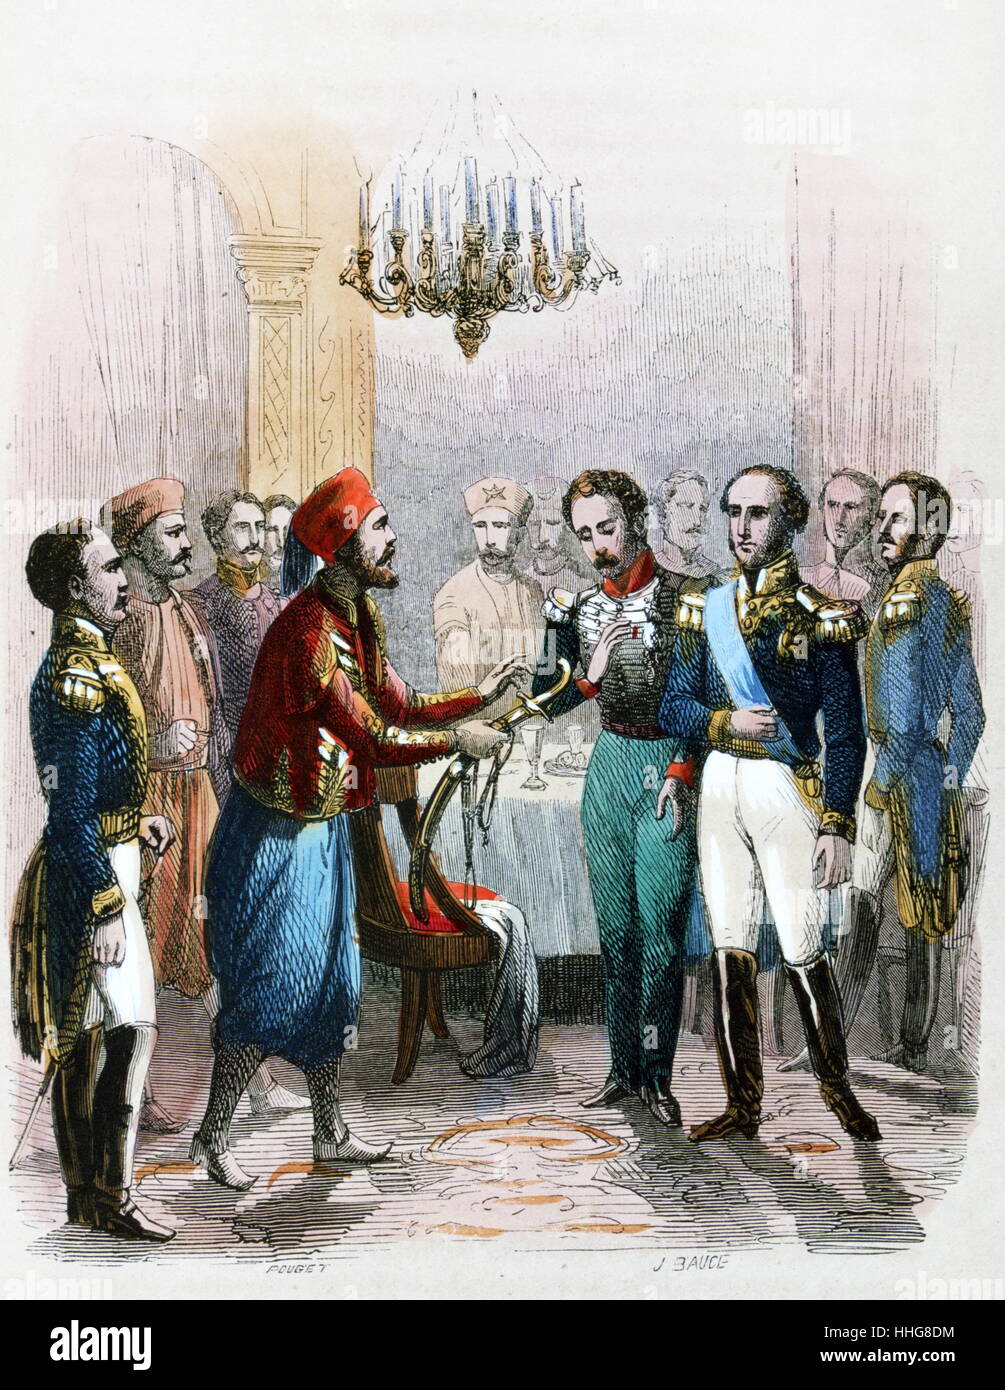 Meeting between Ibrahim Pasha and Colonel Seve. Pasha, the son of Muhammad Ali Pasha, Ottoman Viceroy of Egypt. Ibrahim Pasha (1789-1848) commanded the Egyptian army. After his father became senile Ibrahim ruled Egypt. Suleiman Pasha al-Faransawi (Suleiman Pasha 1788 – 1860) was born Joseph Anthelme Seve; a French-born Egyptian commander. Watercolour by the French painter Jean-Adolphe Beaucé (1818 - 1875). Stock Photo